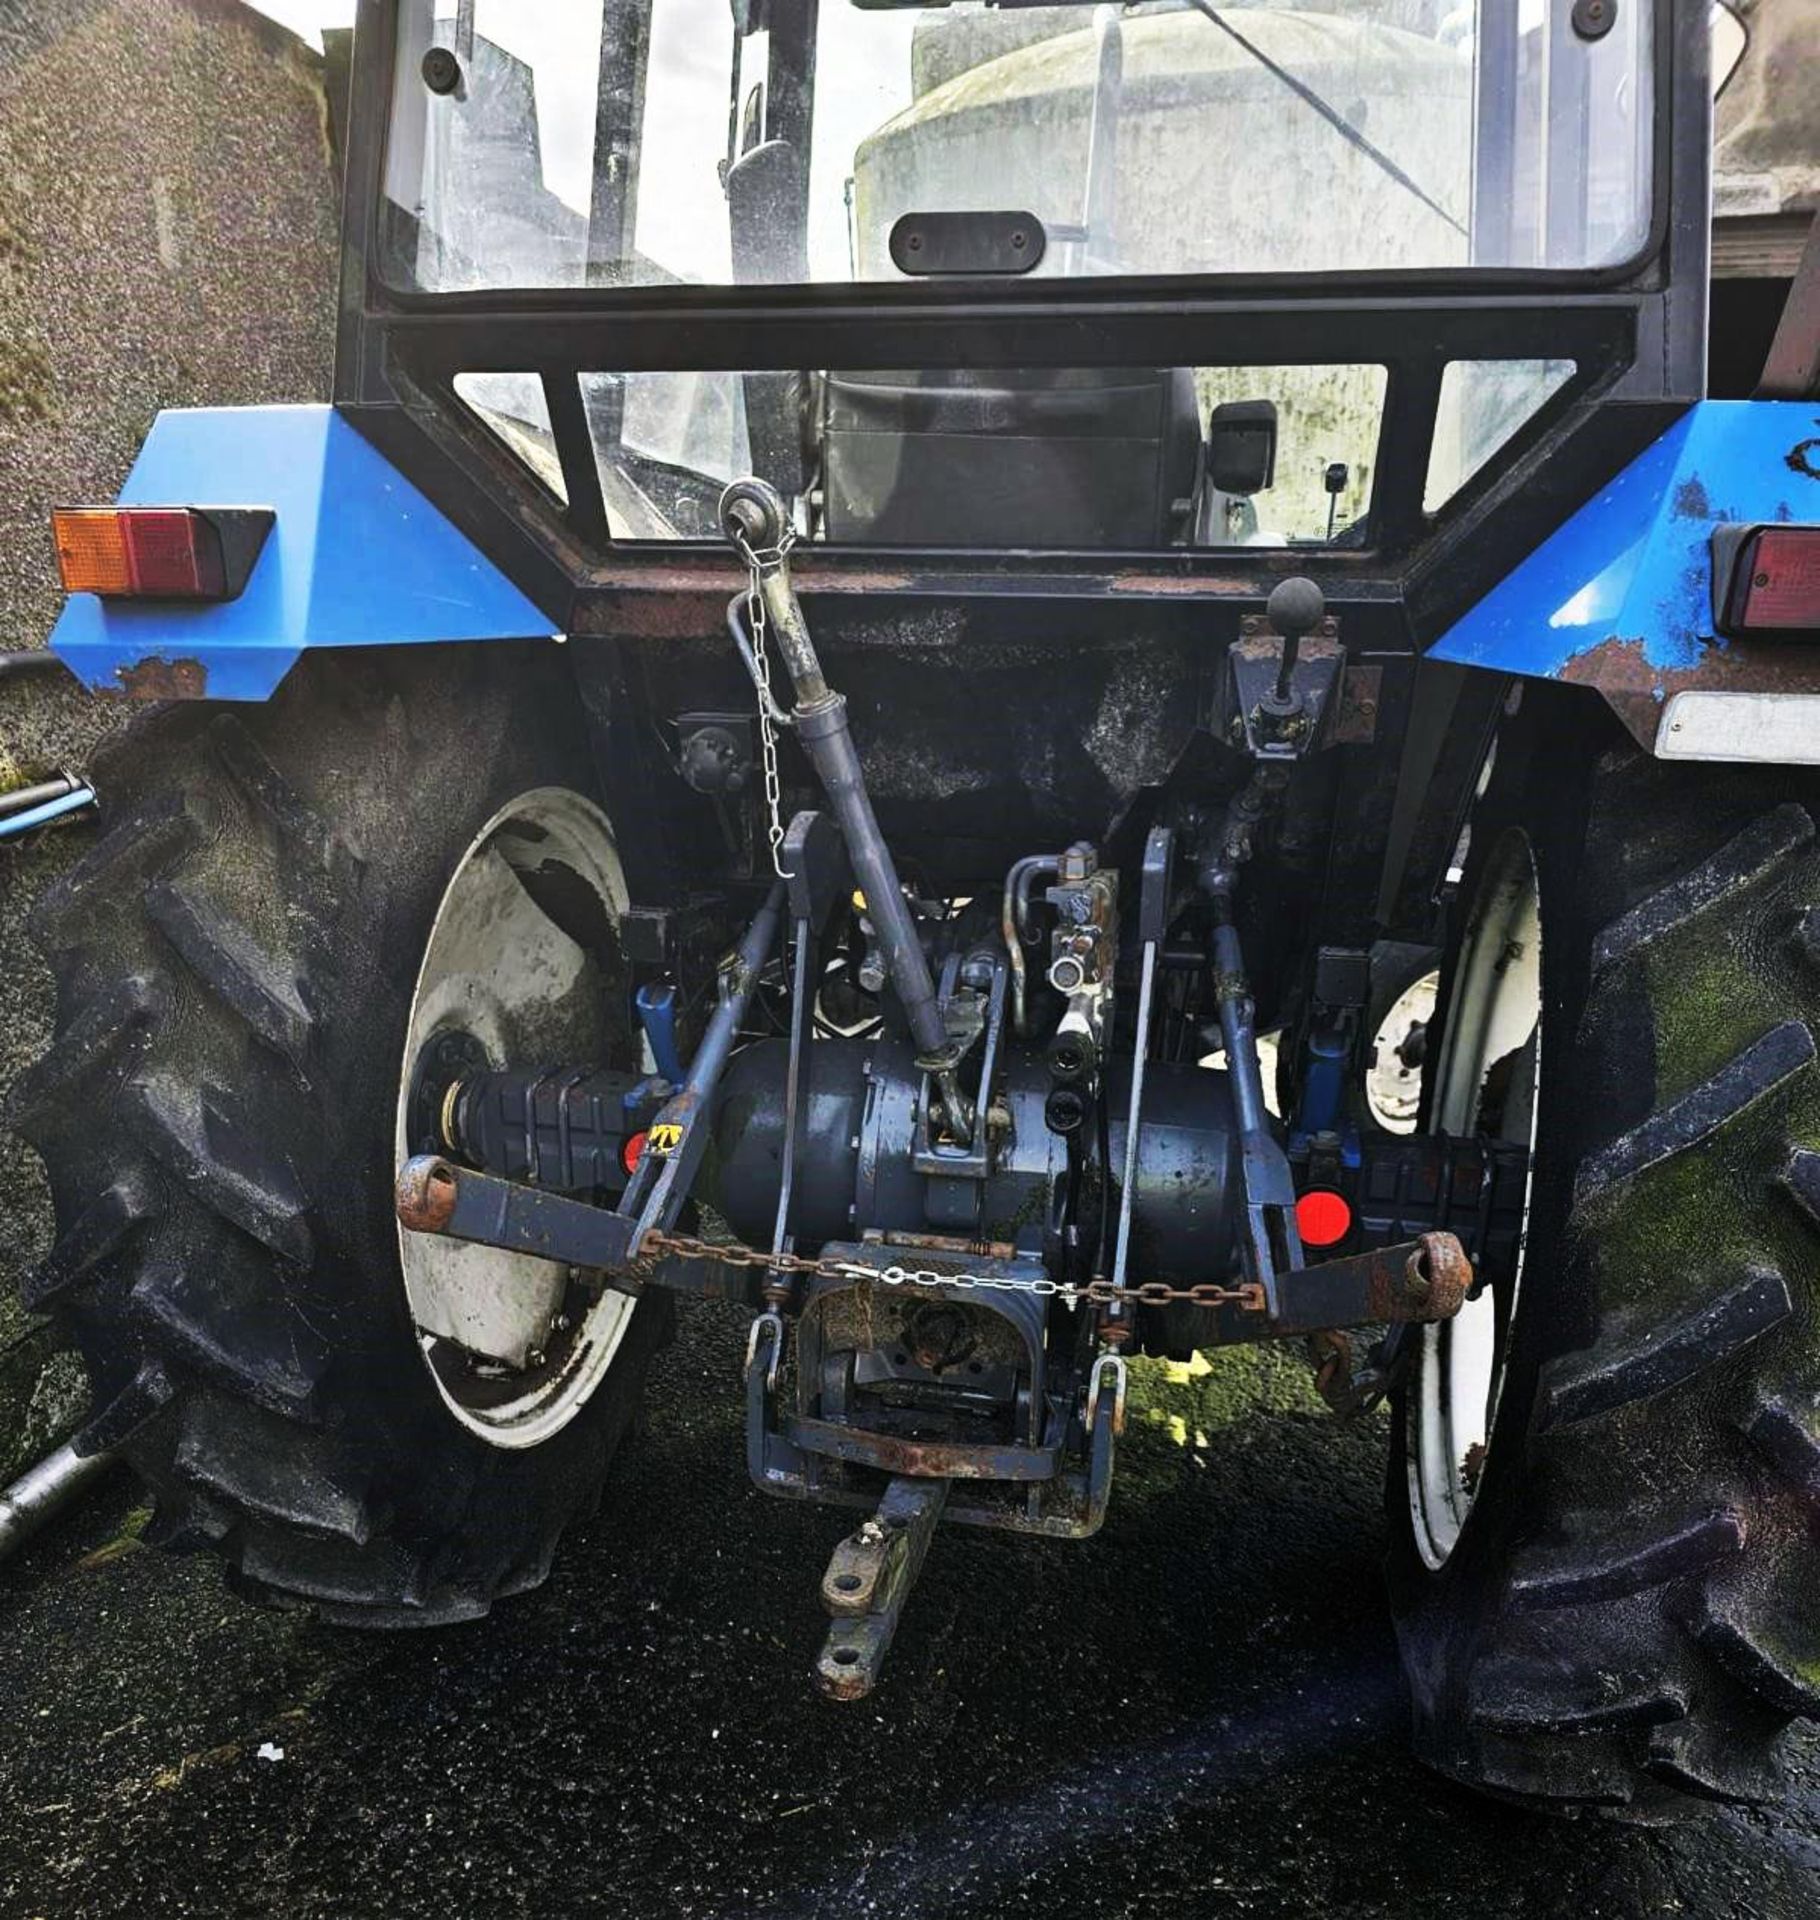 FORD 5030 2 WHEEL DRIVE TRACTOR 9014 HOURS ONE OWNER FROM NEW REG.NO. M85 TRC FIRST REG 01/06/95 - Image 13 of 13